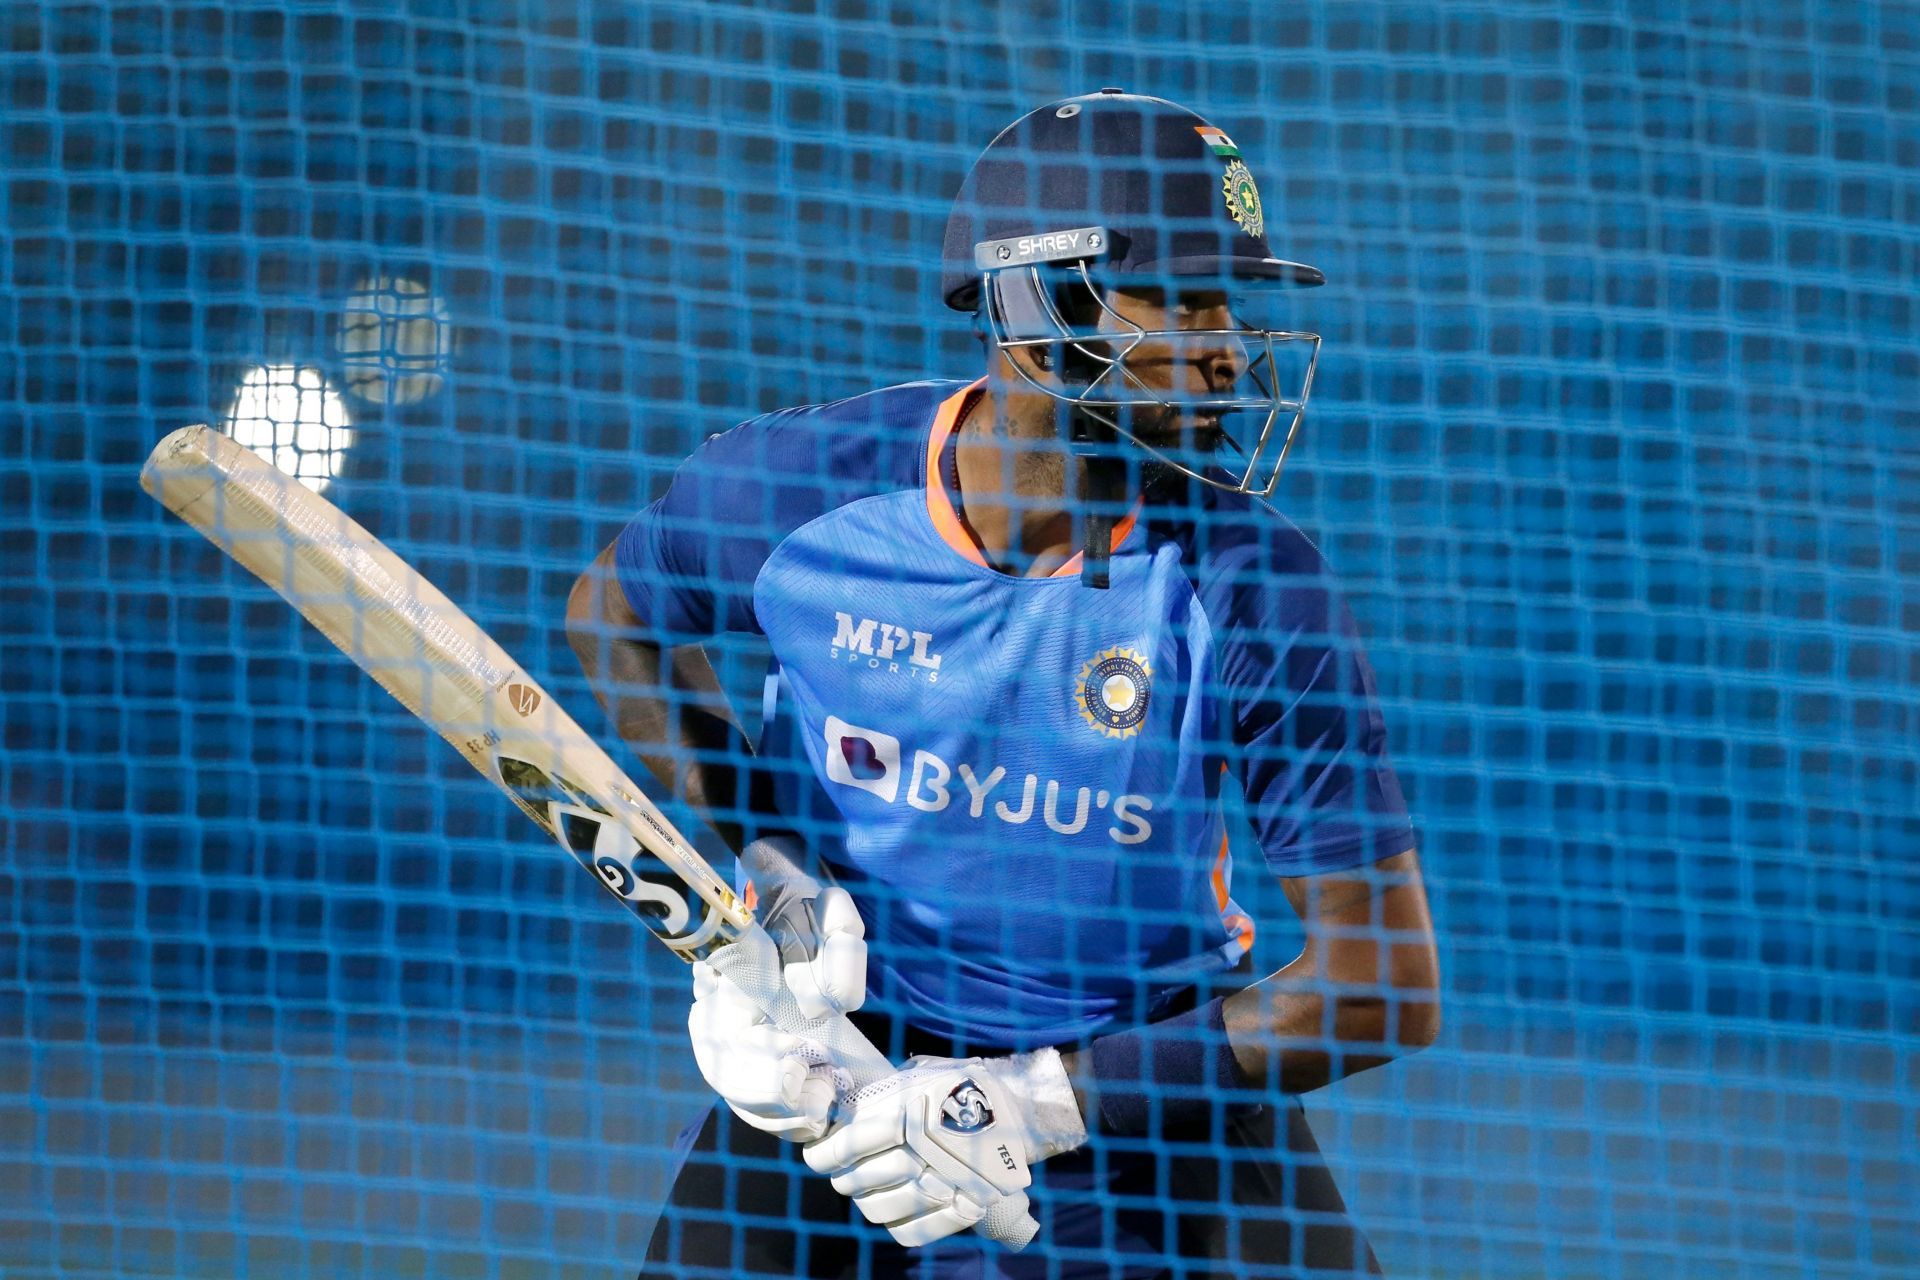 In-form all-rounder Hardik Pandya is expected to be an X-Factor in Asia Cup 2022. He is a handy sixth bowling option with ability to pick up wickets.